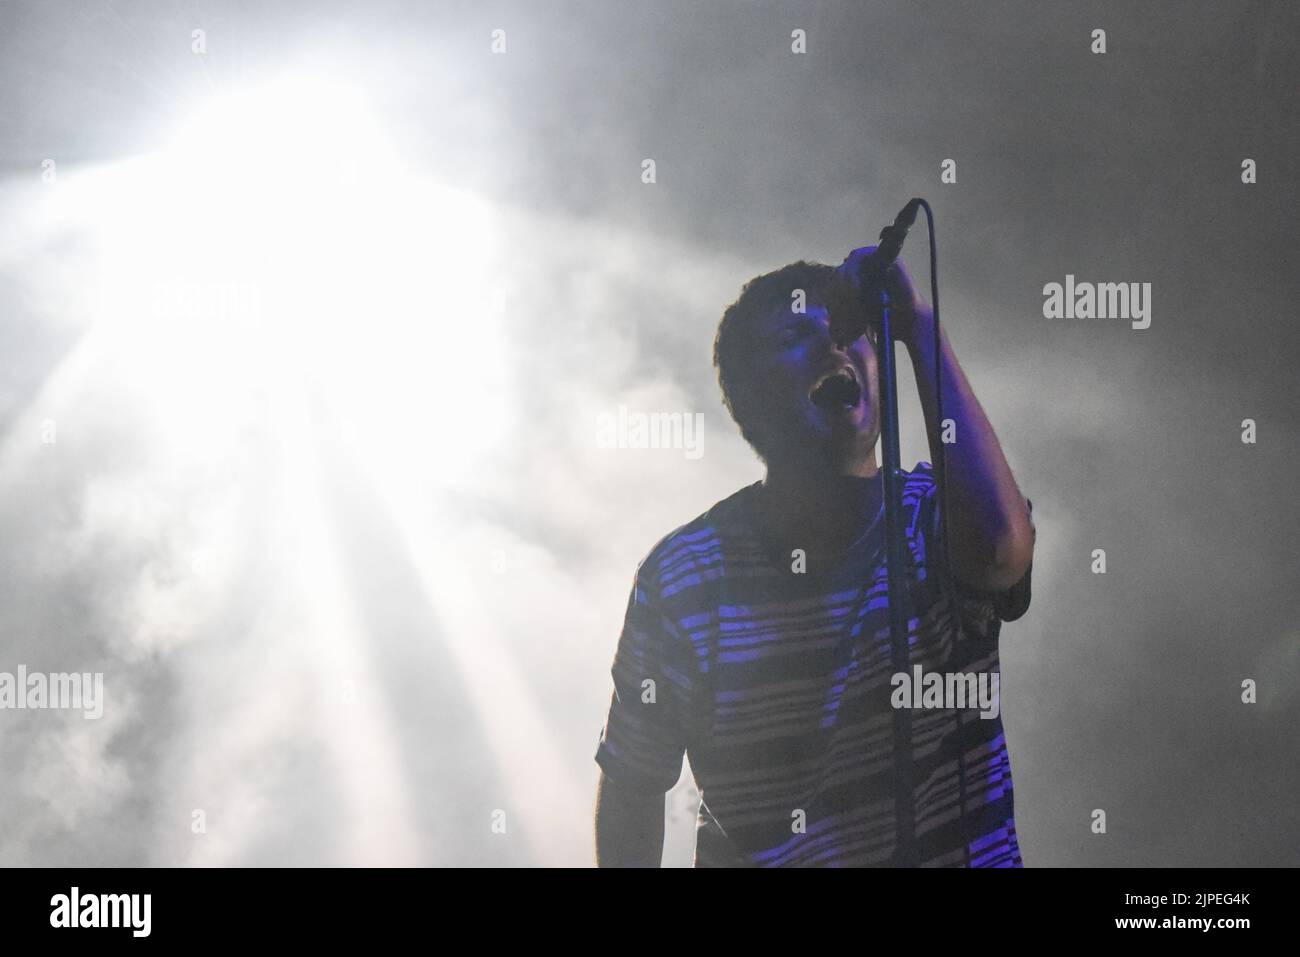 Padova, Italy. 16th Aug, 2022. Fontaines D.C. Live at Parco della Musica - Grian Chatten during Fontaines D.C., Music Concert in Padova, Italy, August 16 2022 Credit: Independent Photo Agency/Alamy Live News Stock Photo